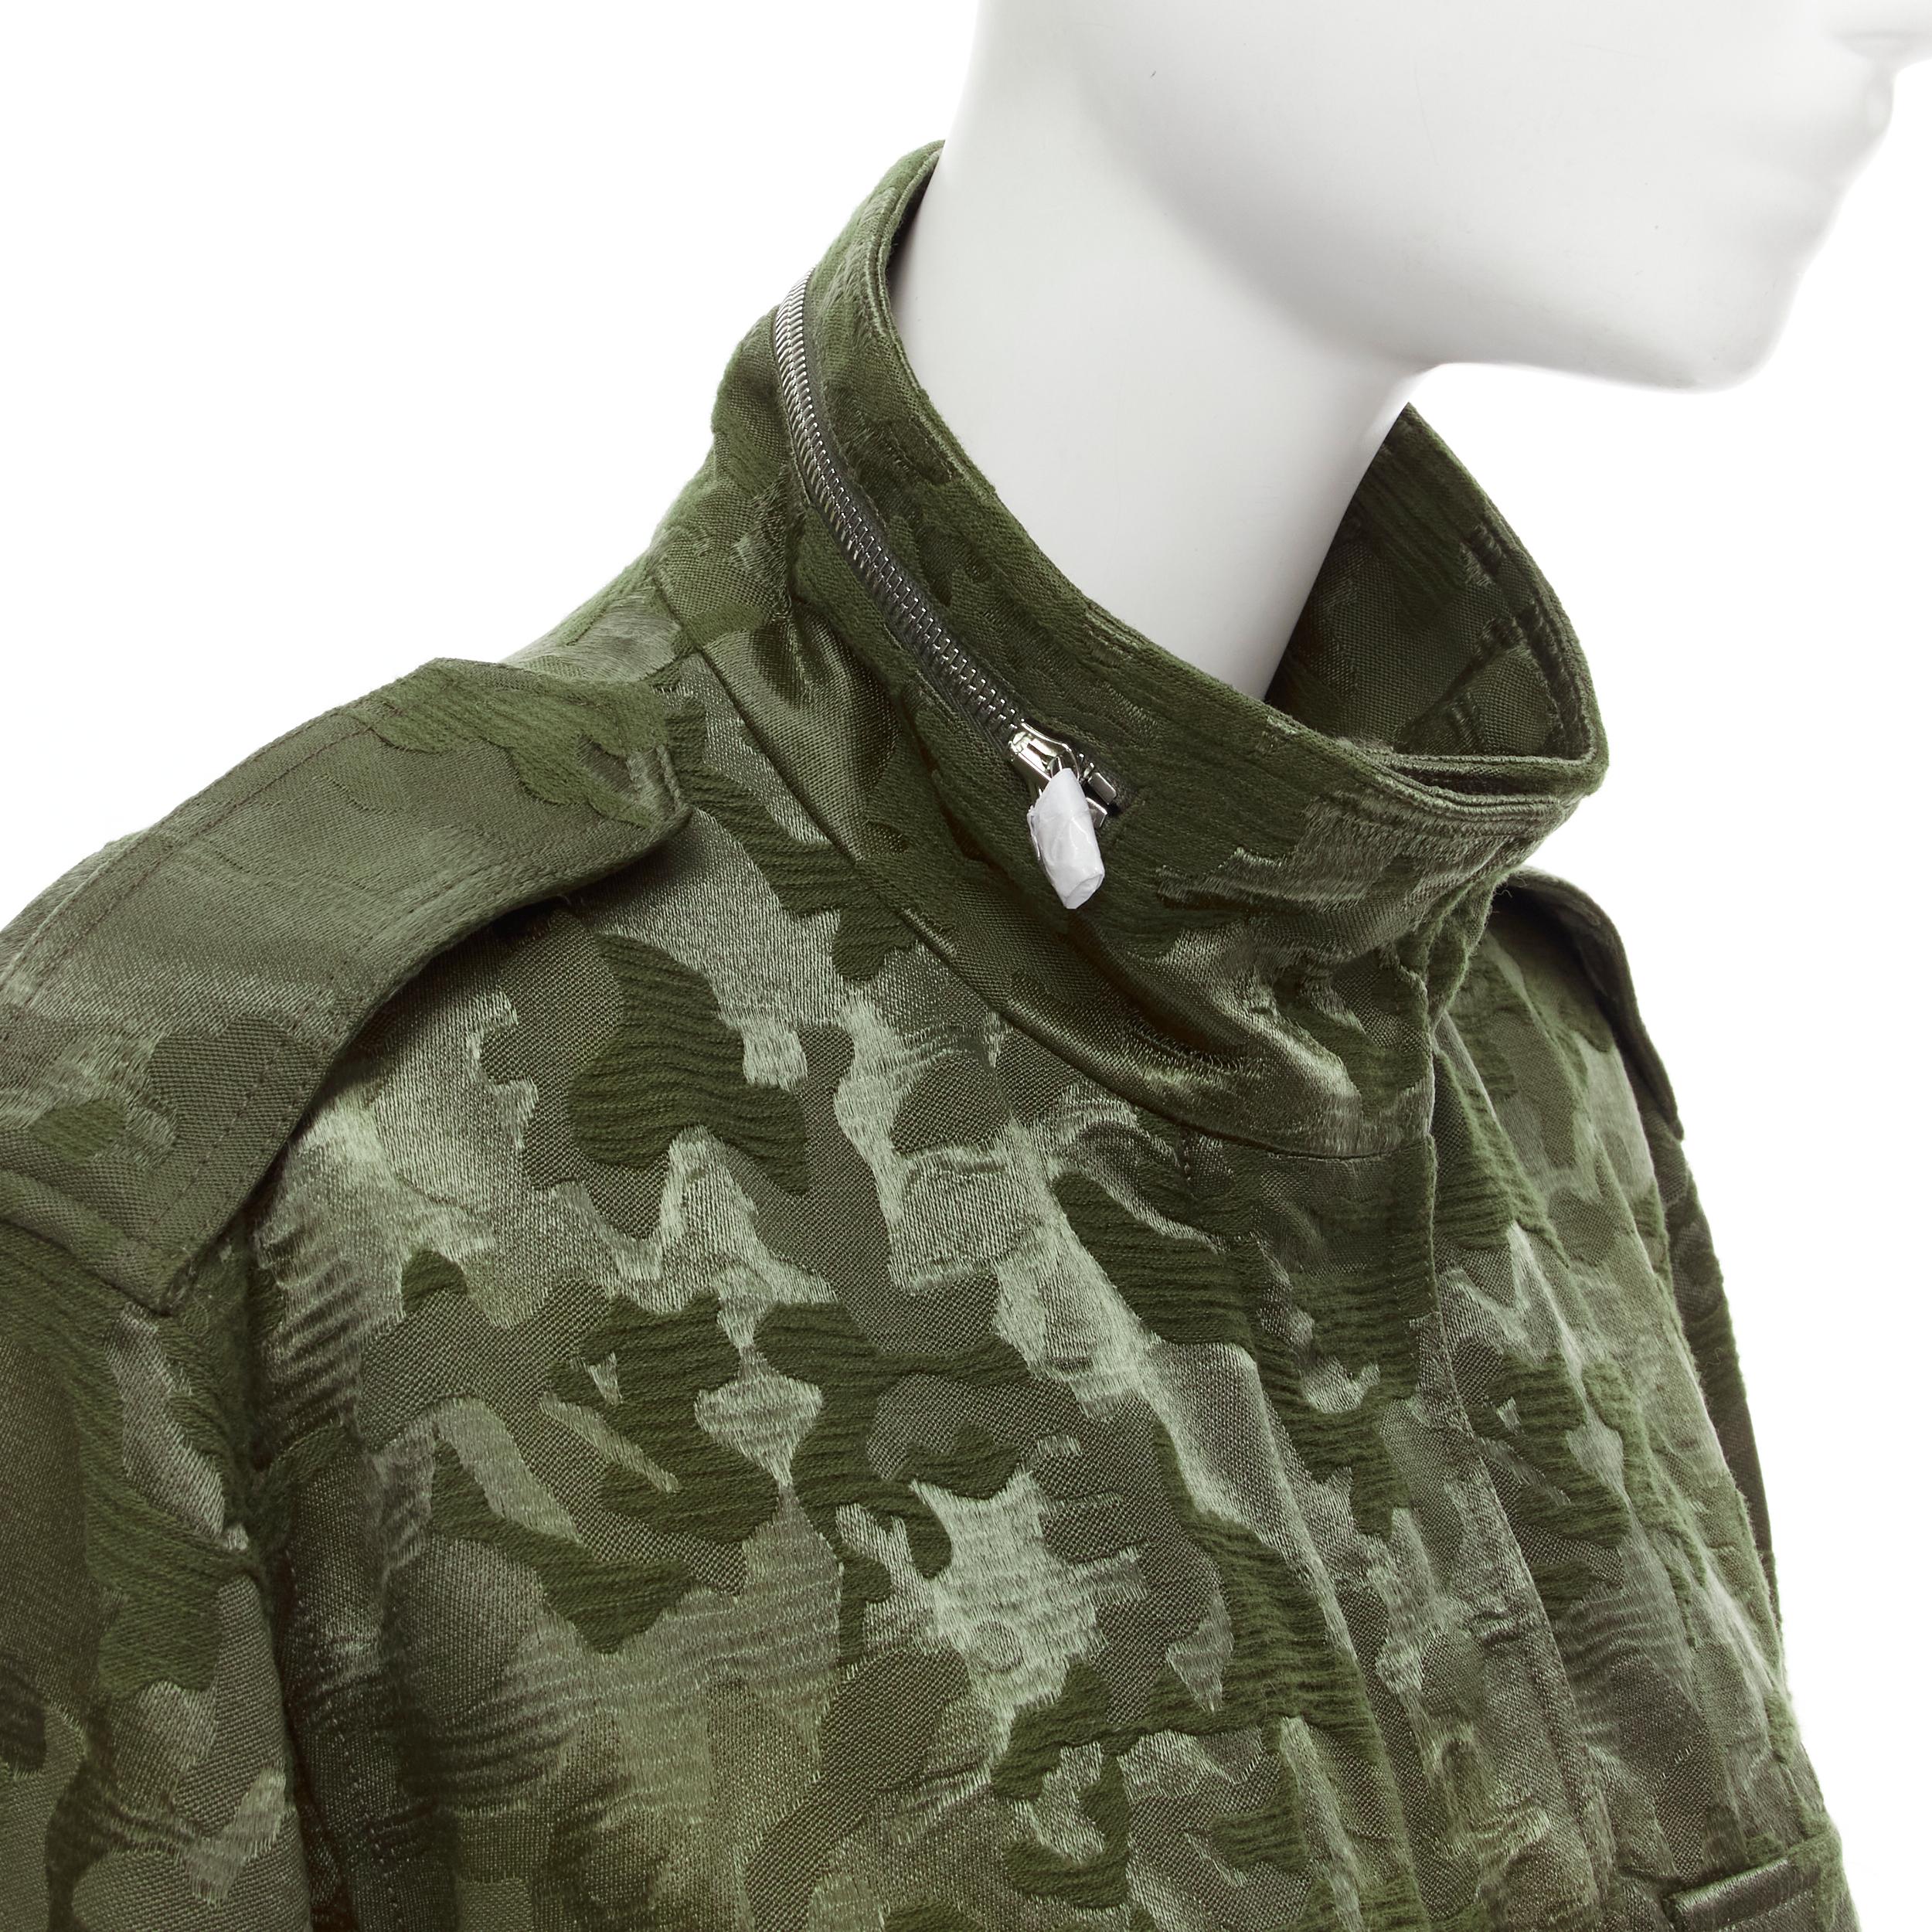 new ALEXANDER WANG Army green camouflage jacquard military coat XS 
Reference: MELK/A00005 
Brand: Alexander Wang 
Material: Wool 
Color: Green 
Pattern: Camouflage 
Closure: Zip 
Made in: China 

CONDITION: 
Condition: New with tags. 

SIZING: